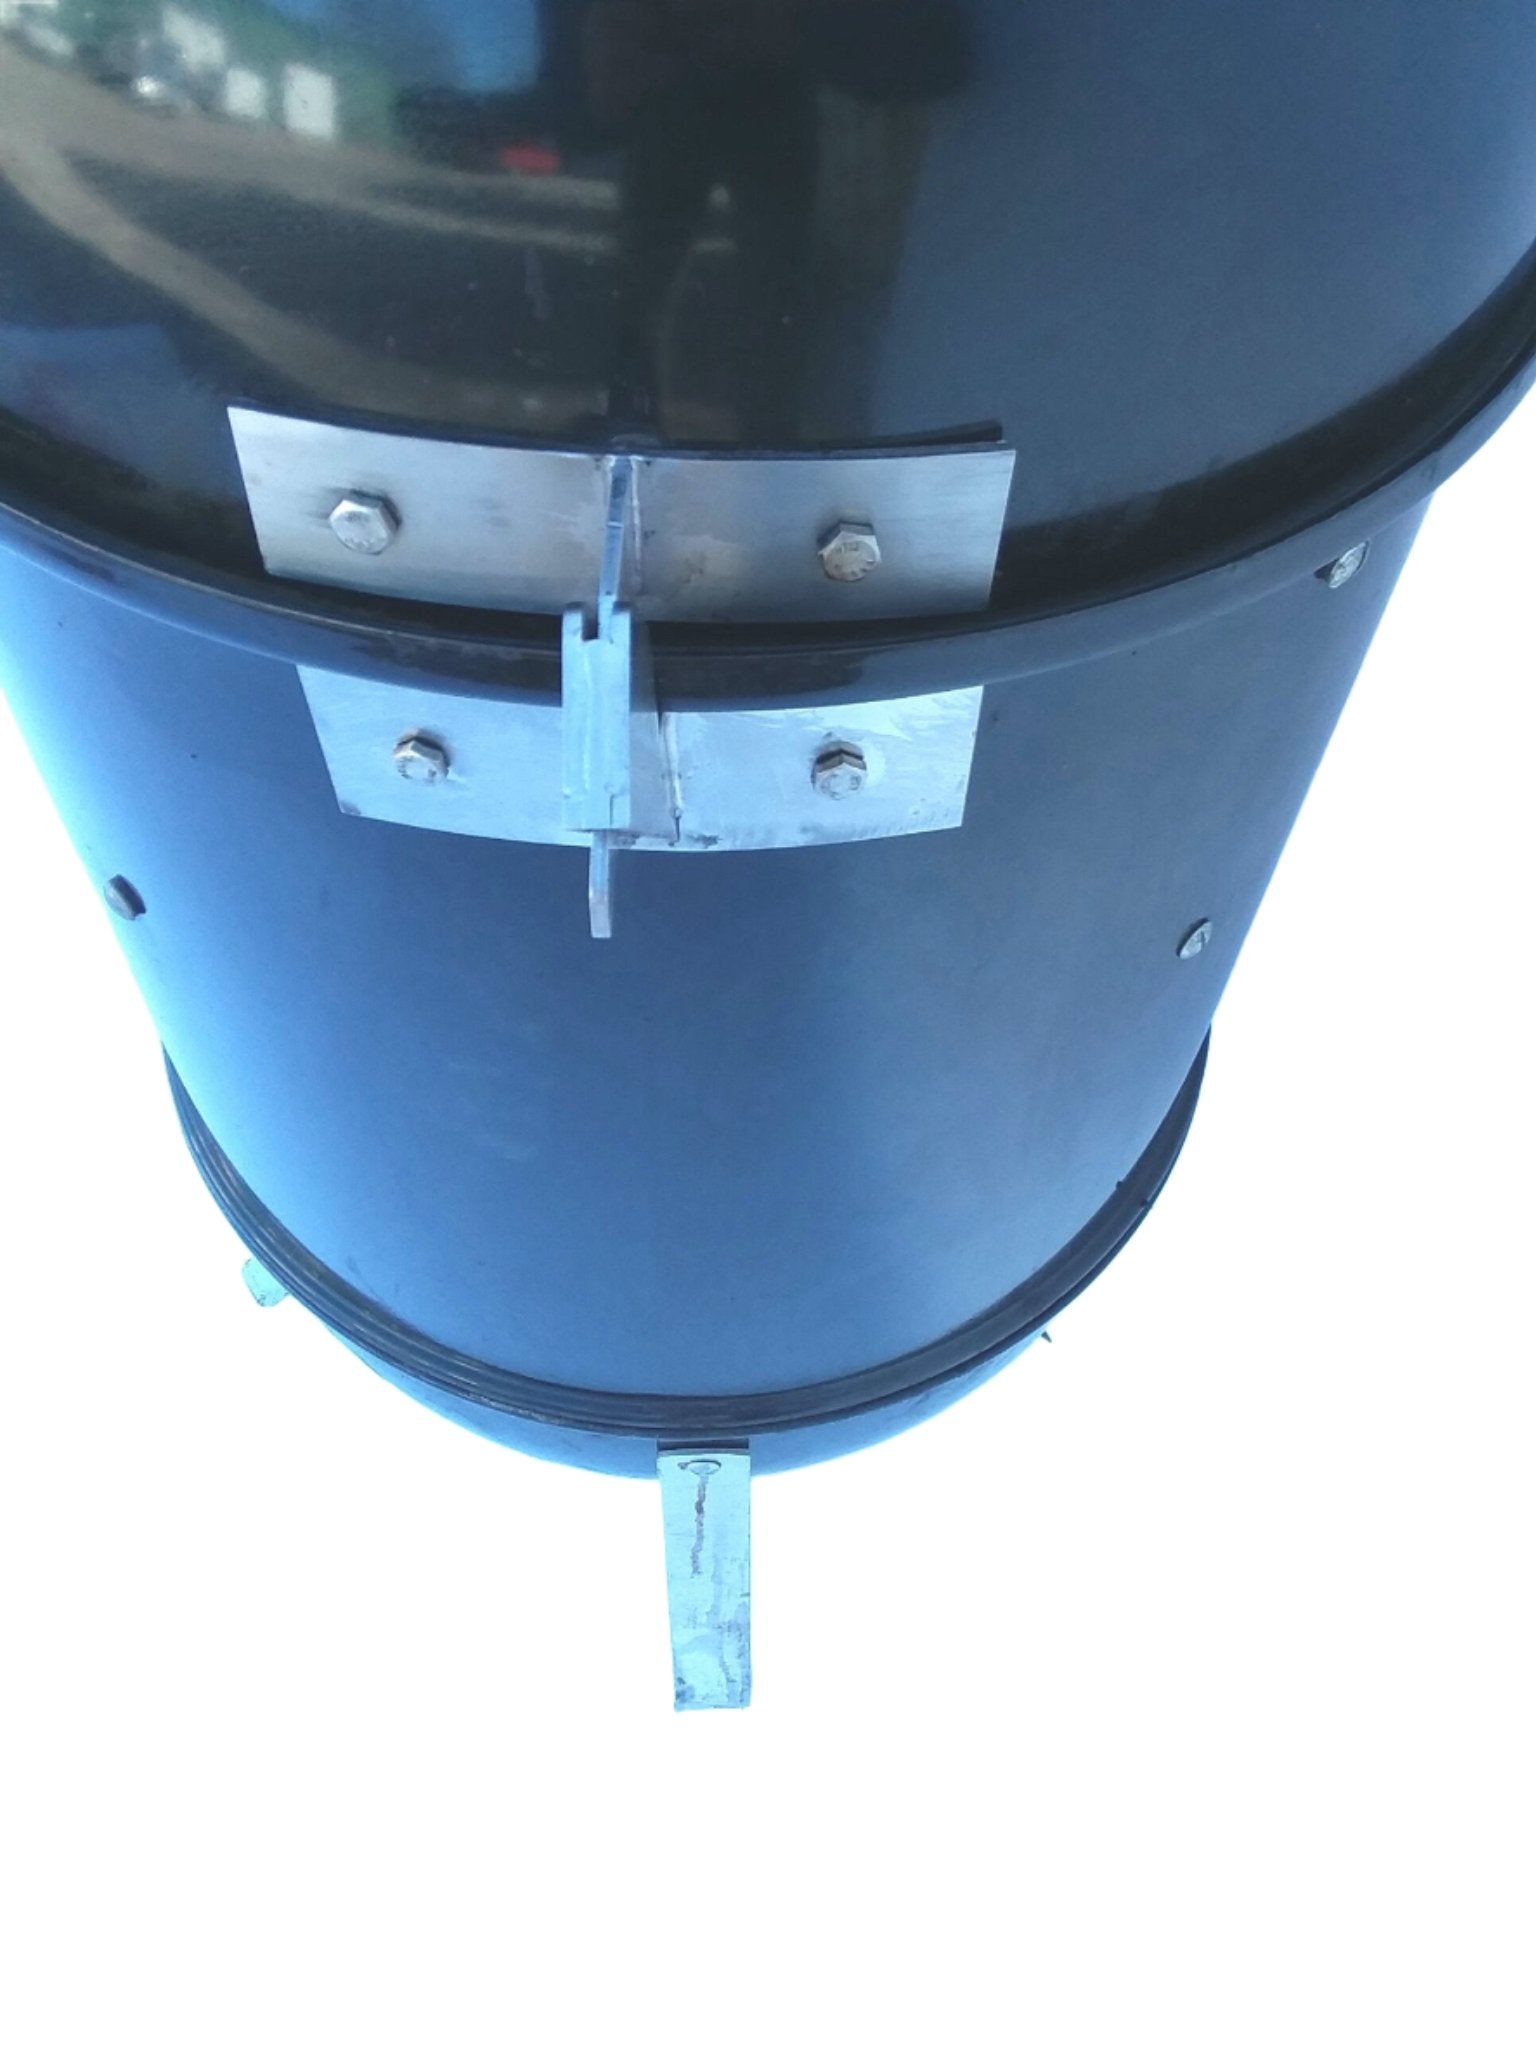 Stainless Steel WSM Hinge & Clip: The Perfect Way to Improve Your WSM - Hunsaker Vortex Smokers